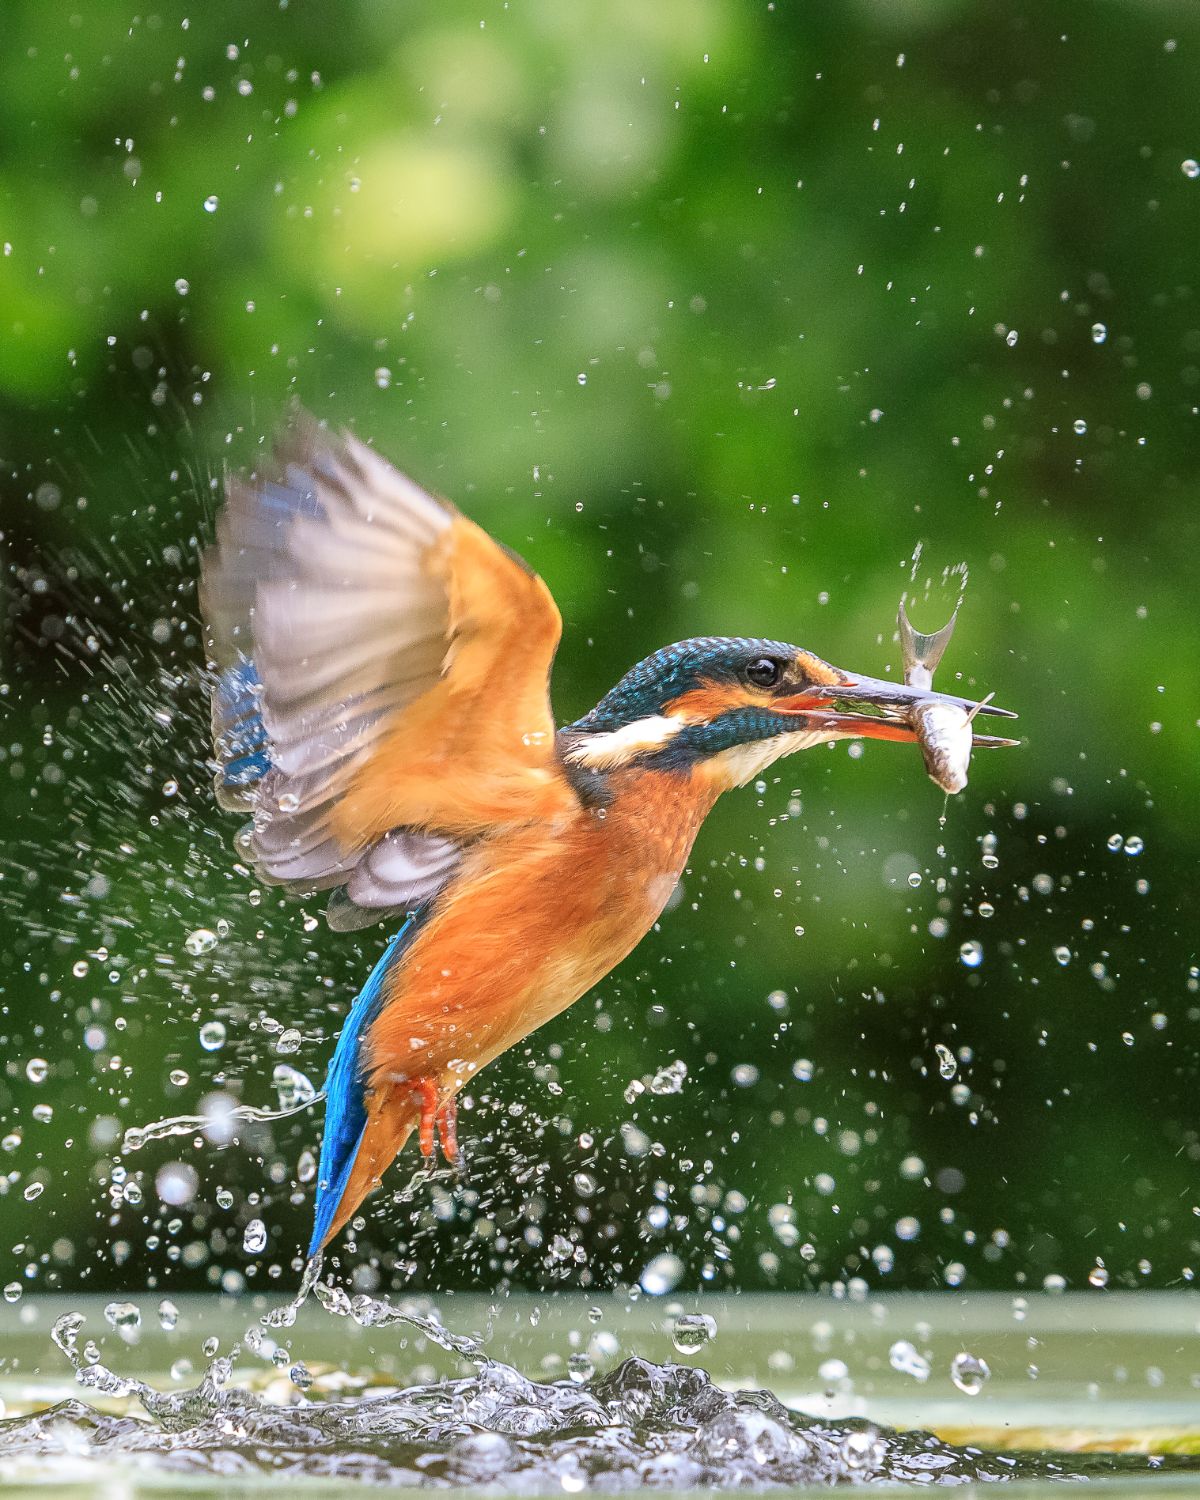 Stunning-Capture-of-Kingfisher-Catching-a-Fish-janet-smith.jpg